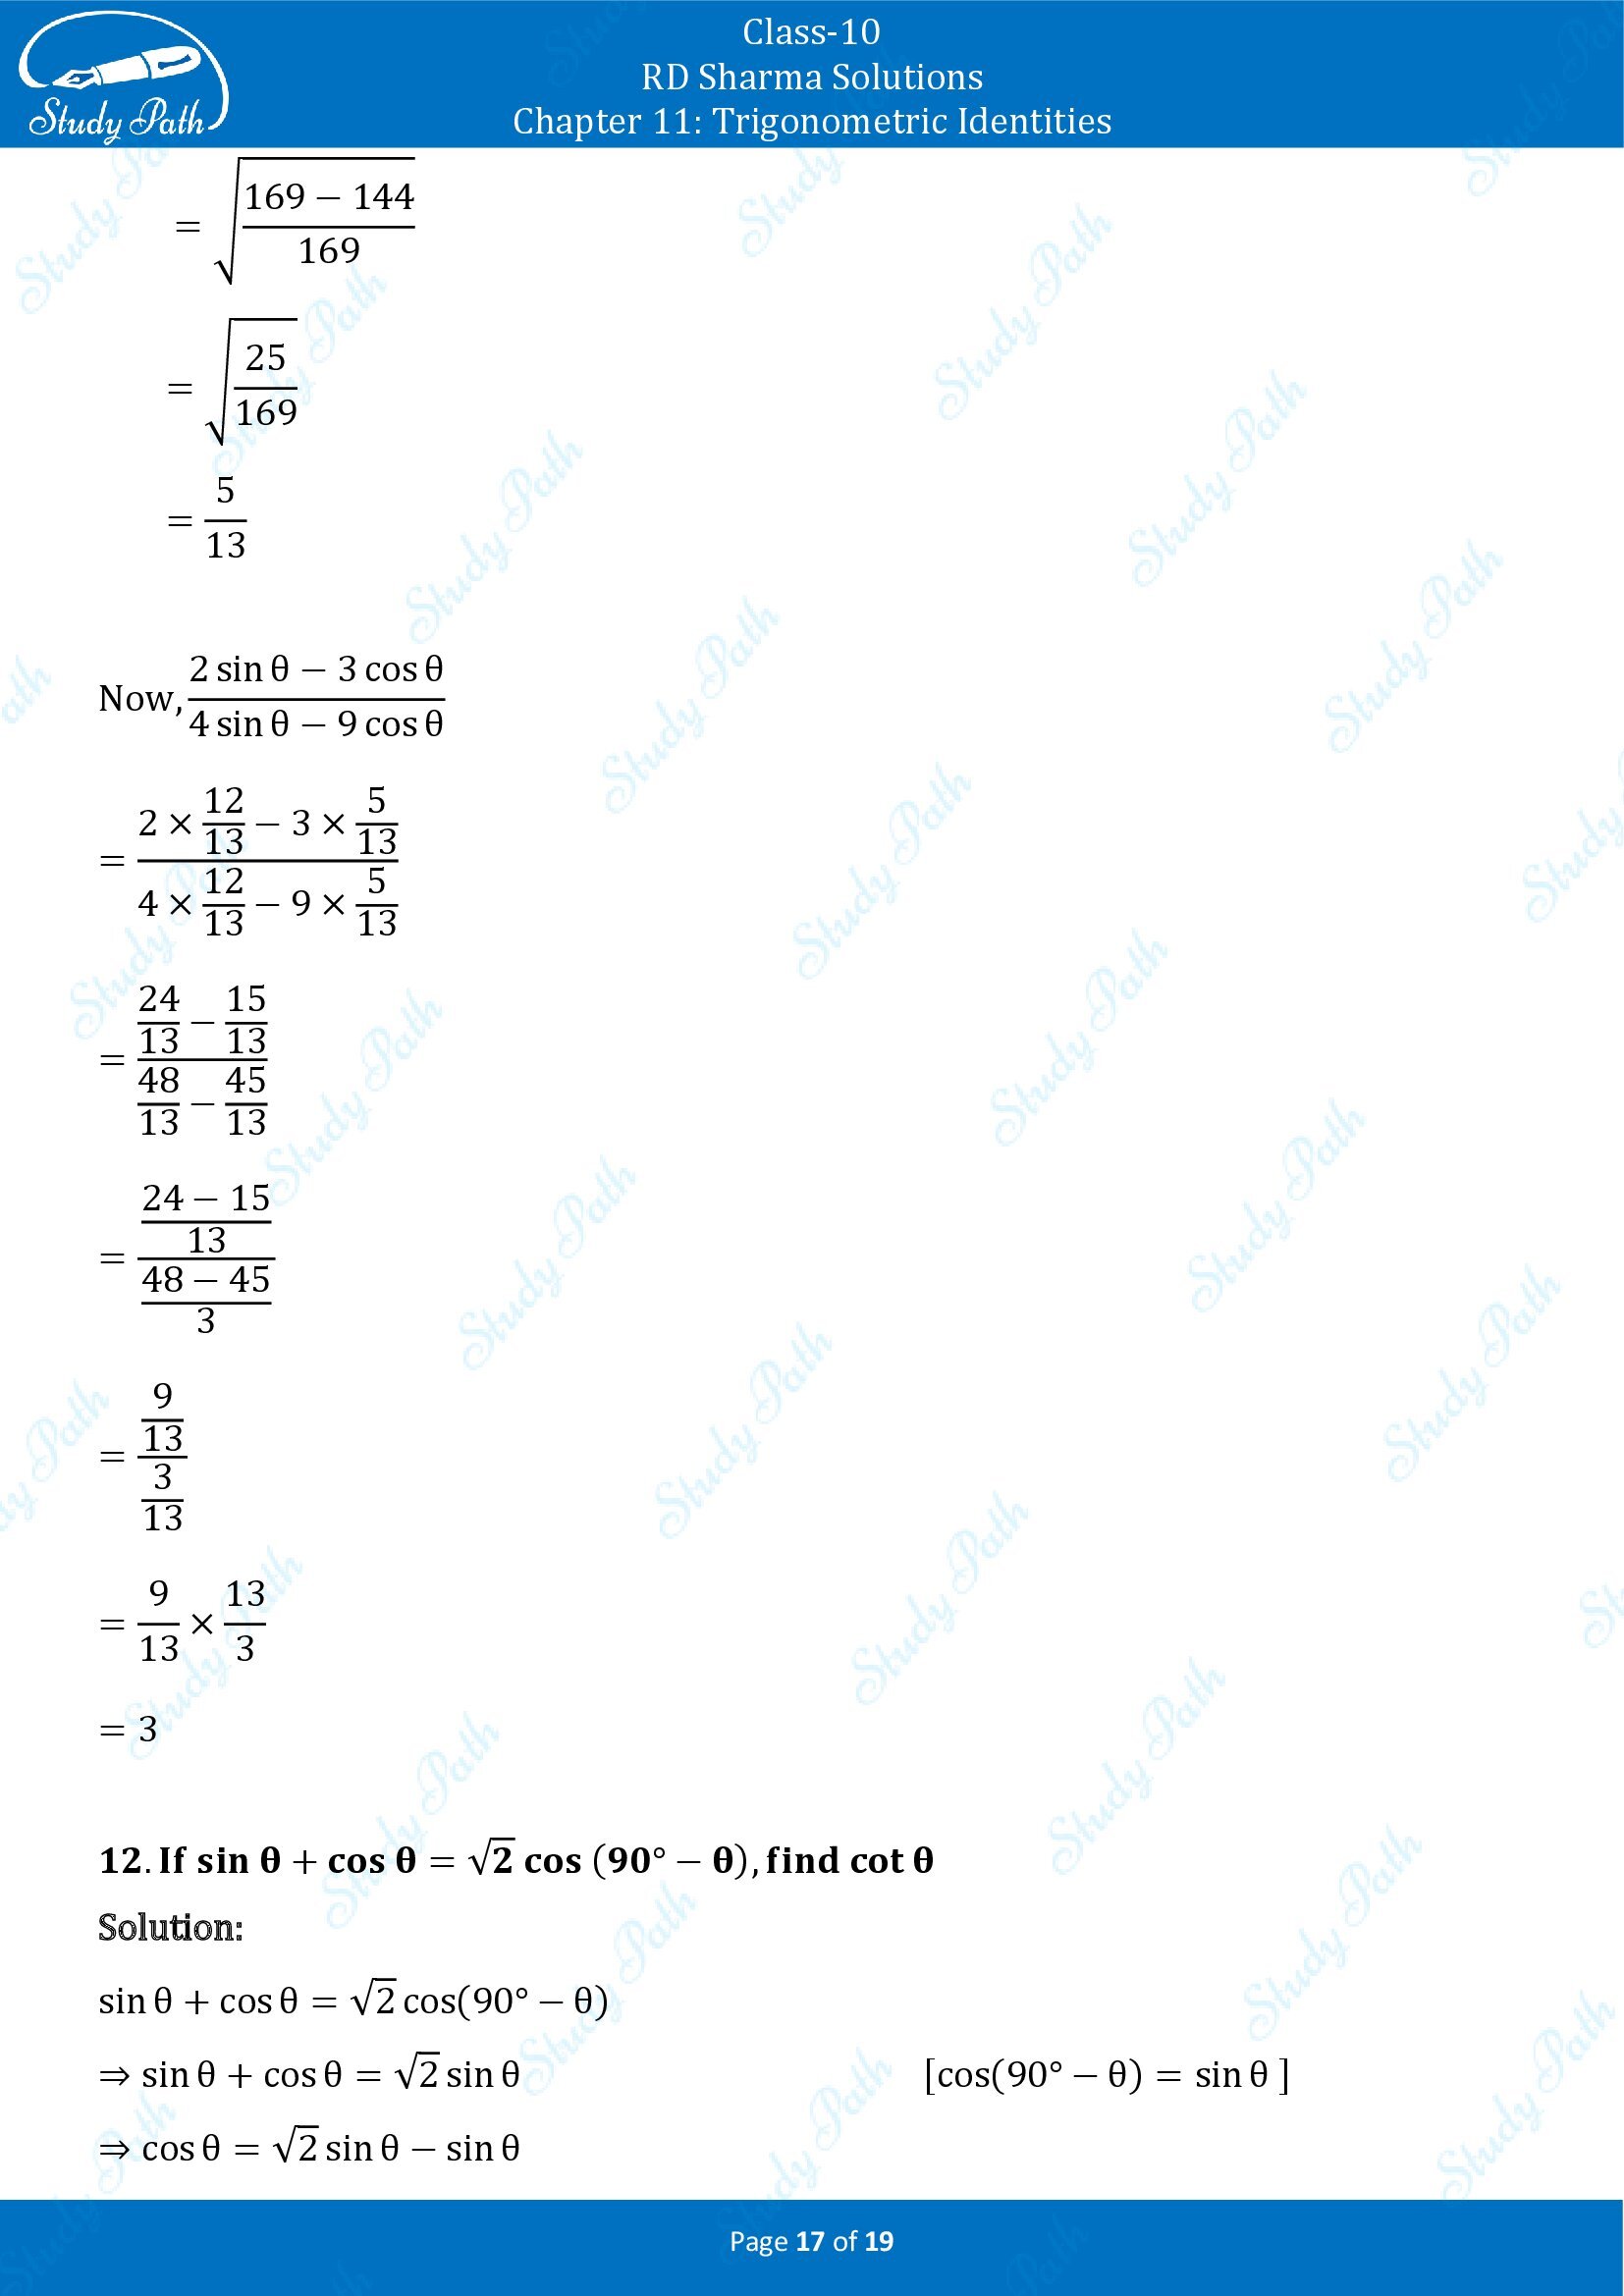 RD Sharma Solutions Class 10 Chapter 11 Trigonometric Identities Exercise 11.2 00017